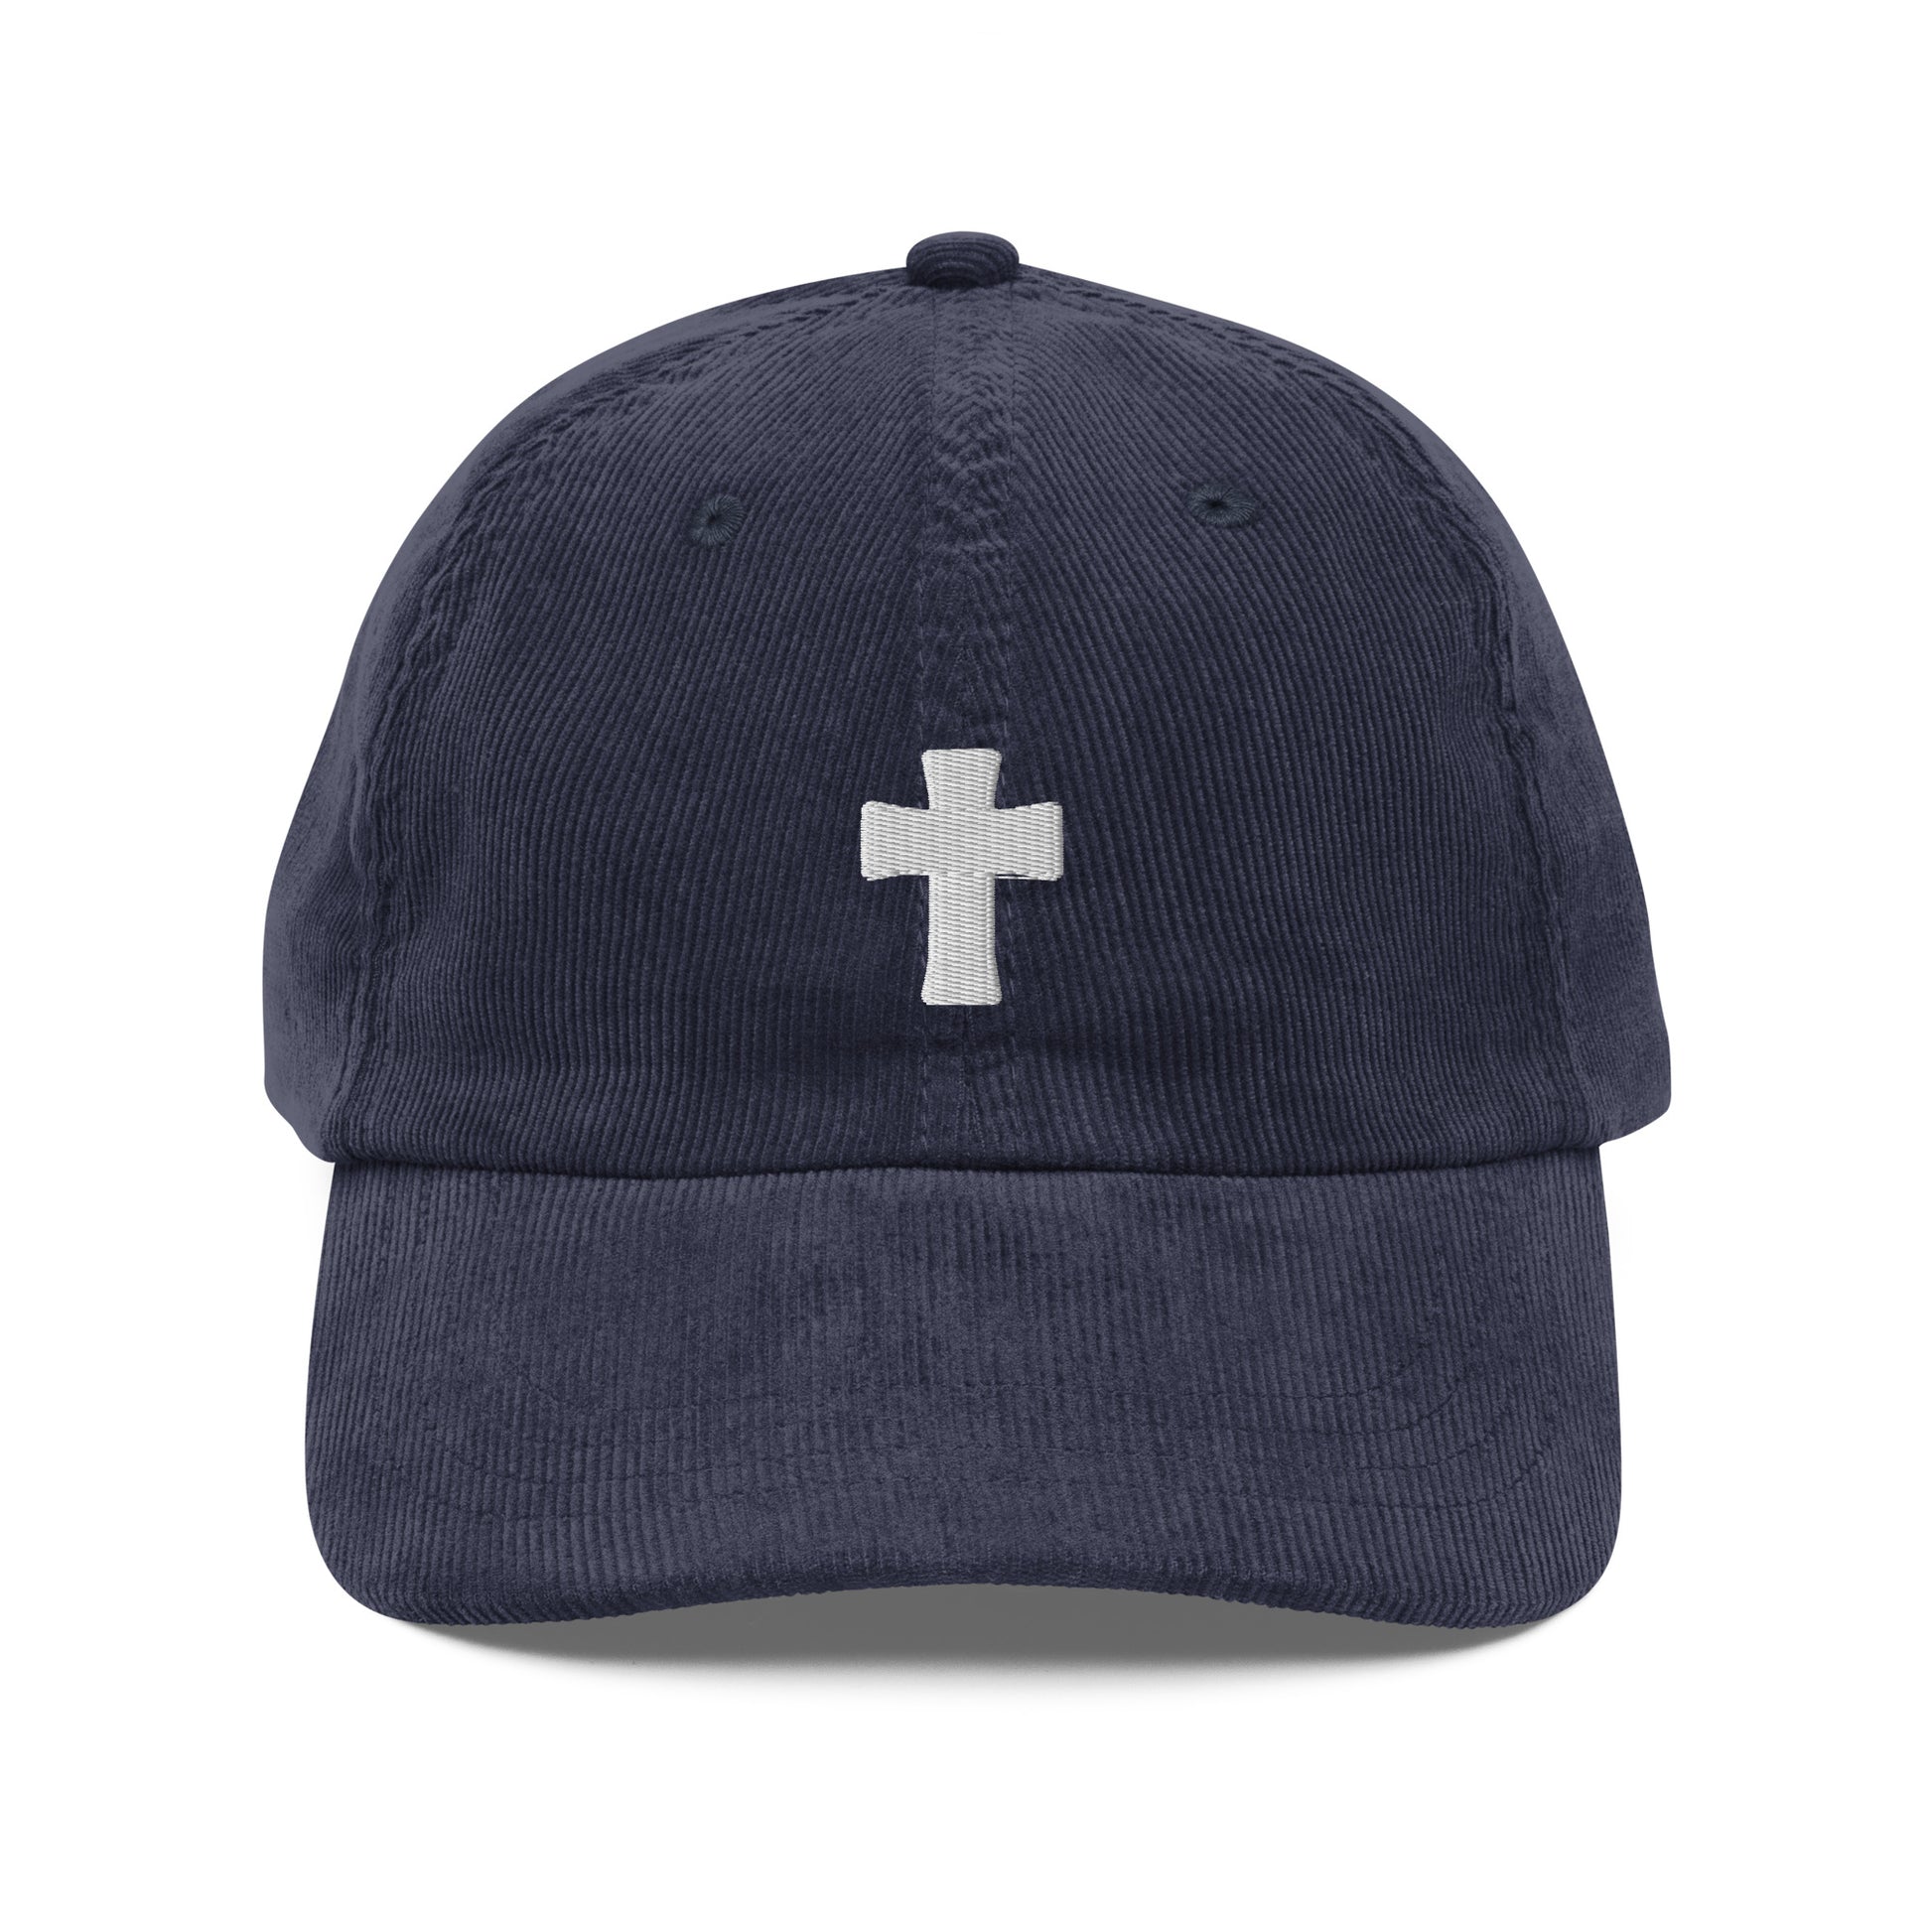 Embroidered Cross Vintage Corduroy Cap - A Thousand Elsewhere